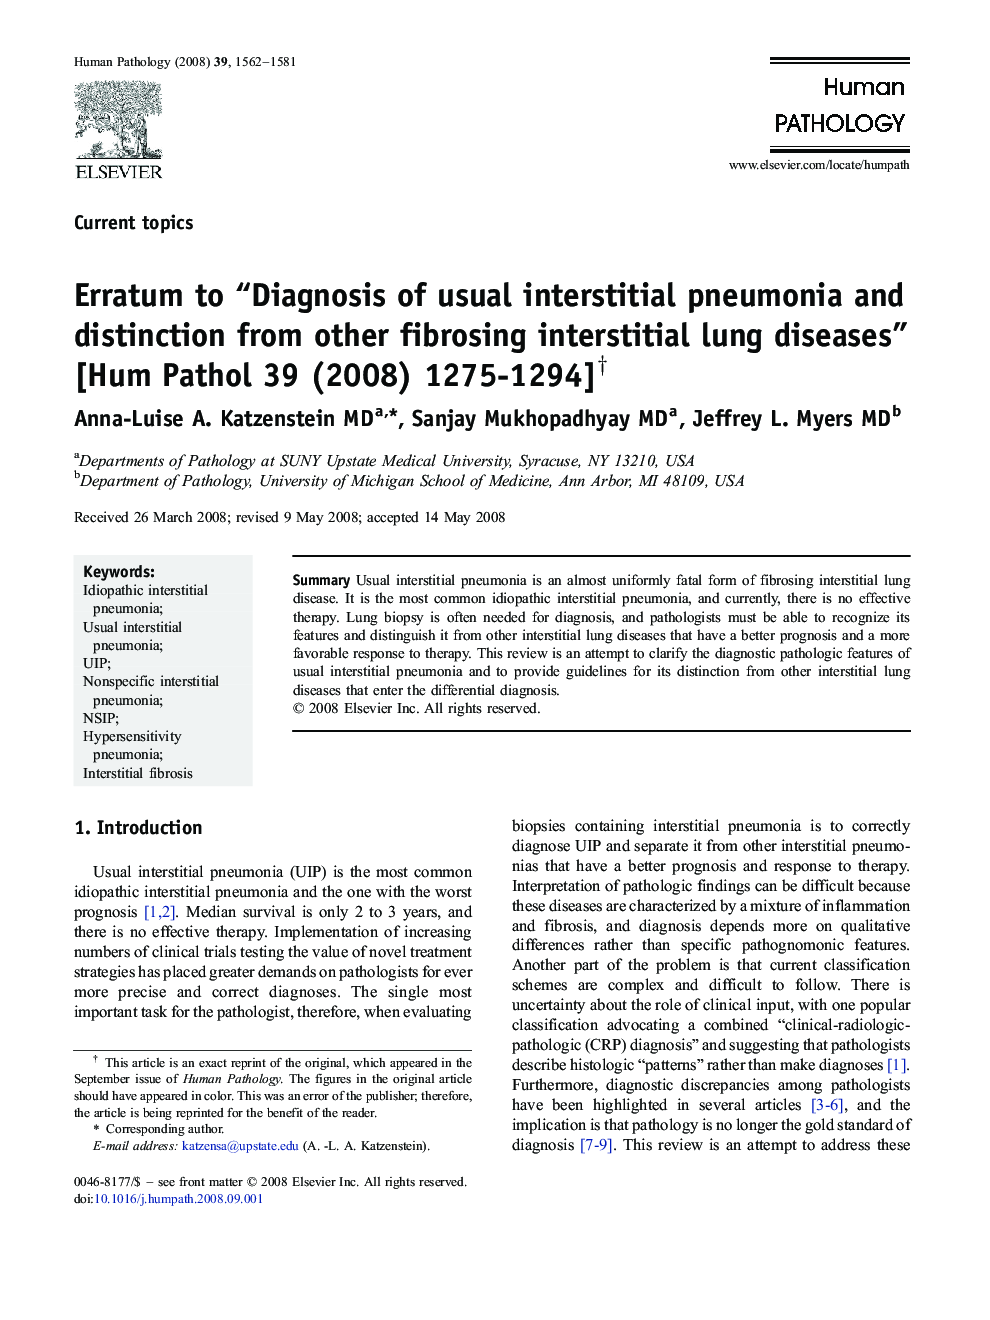 Erratum to “Diagnosis of usual interstitial pneumonia and distinction from other fibrosing interstitial lung diseases” [Hum Pathol 39 (2008) 1275-1294] †